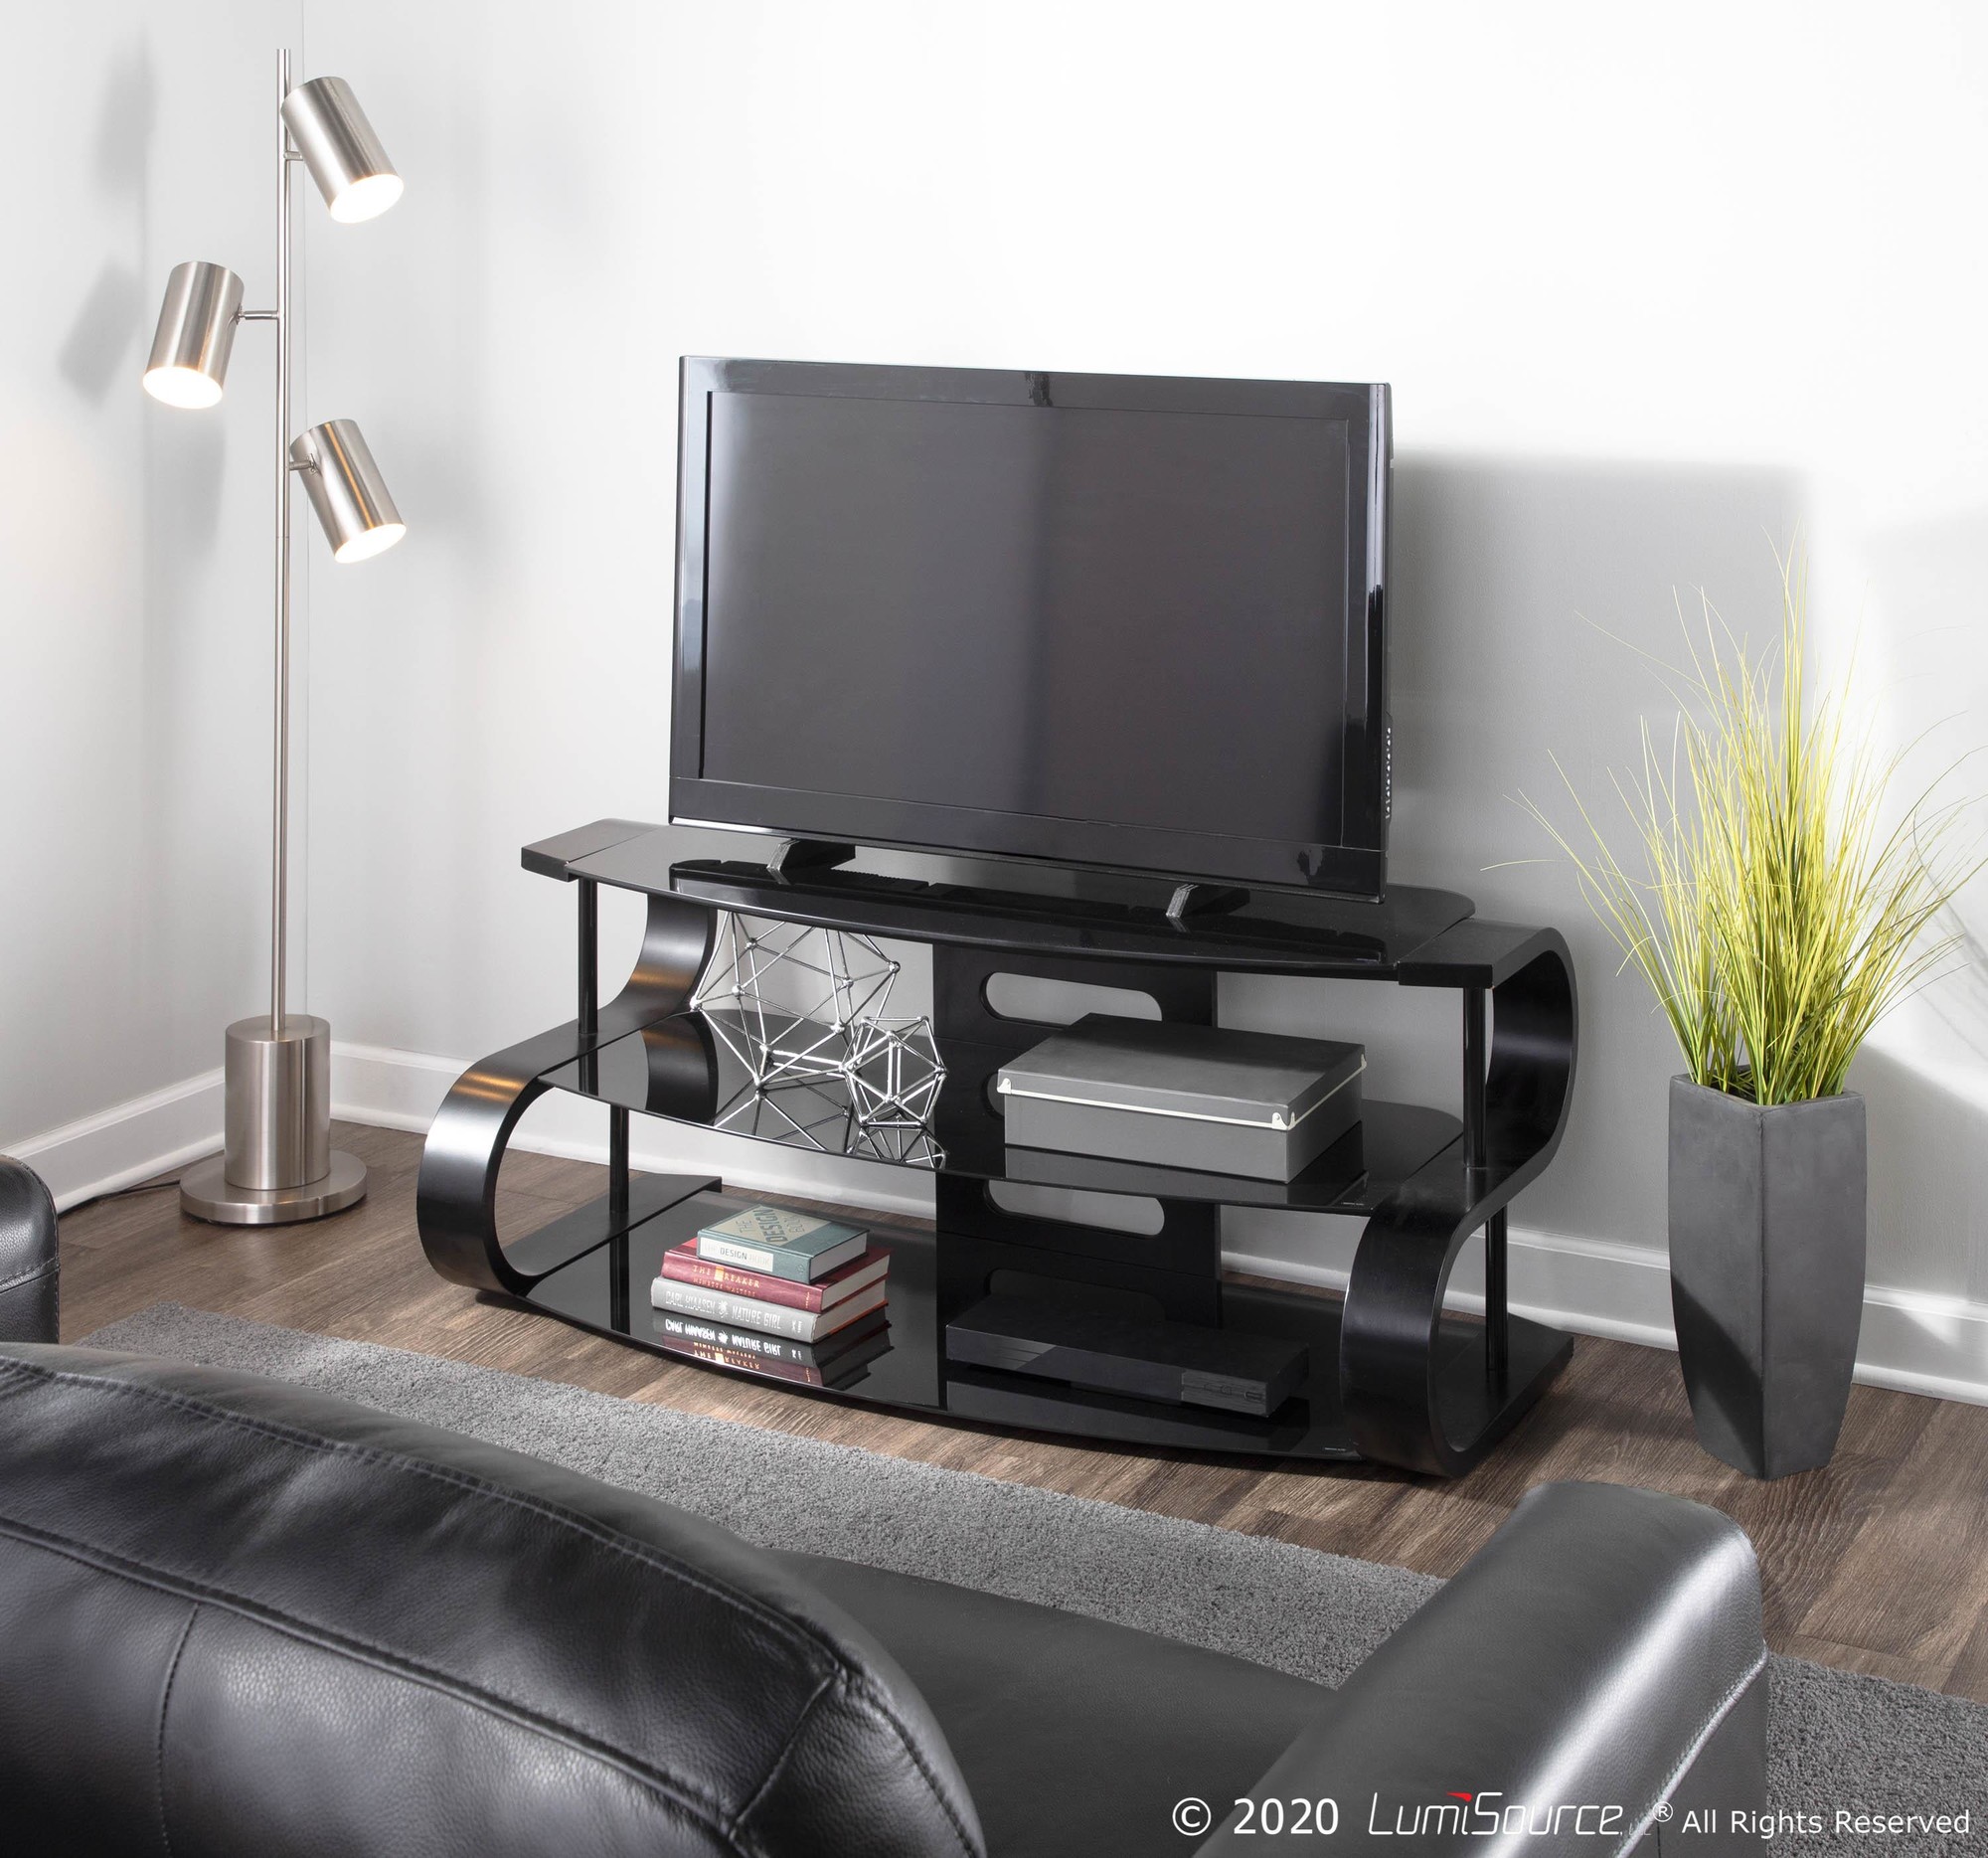 Metro 120 Tv Stand - at Prices Decor Affordable - Stylish LumiSource